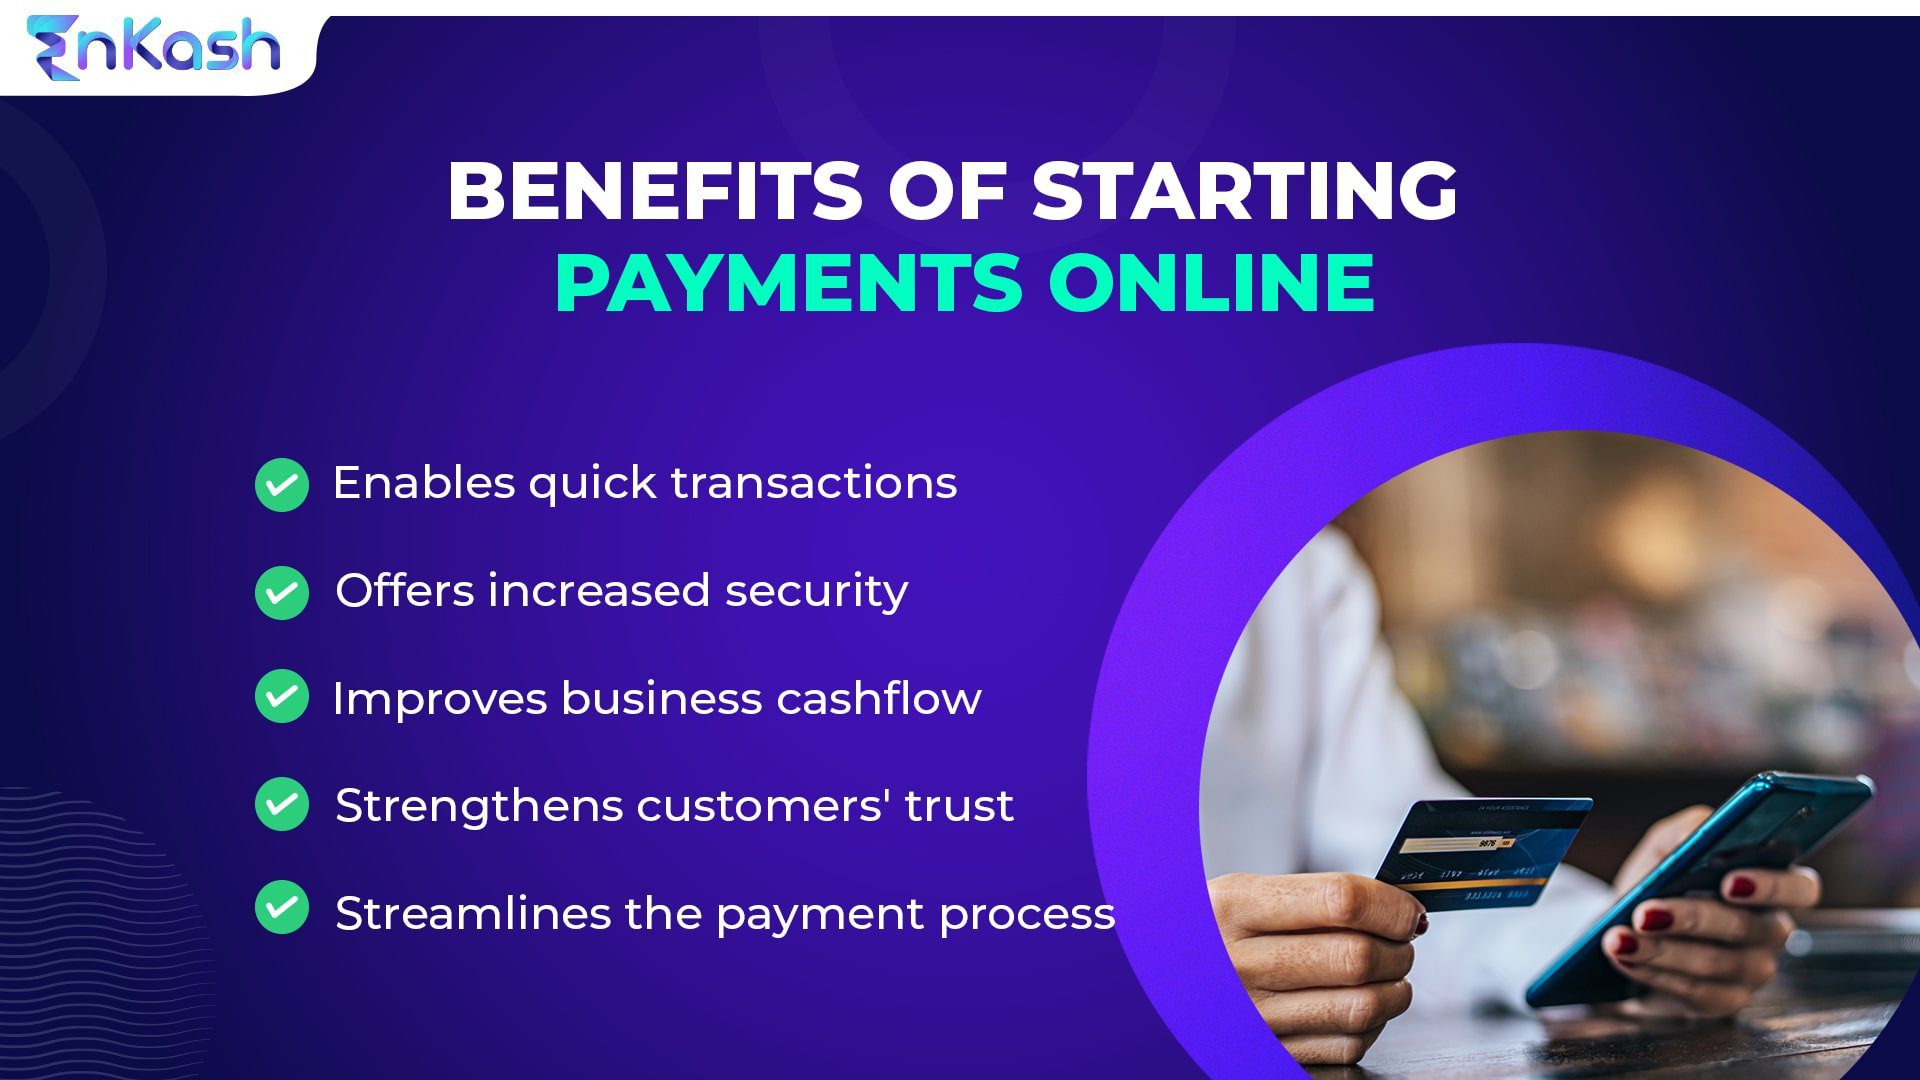 Benefits of starting payments online